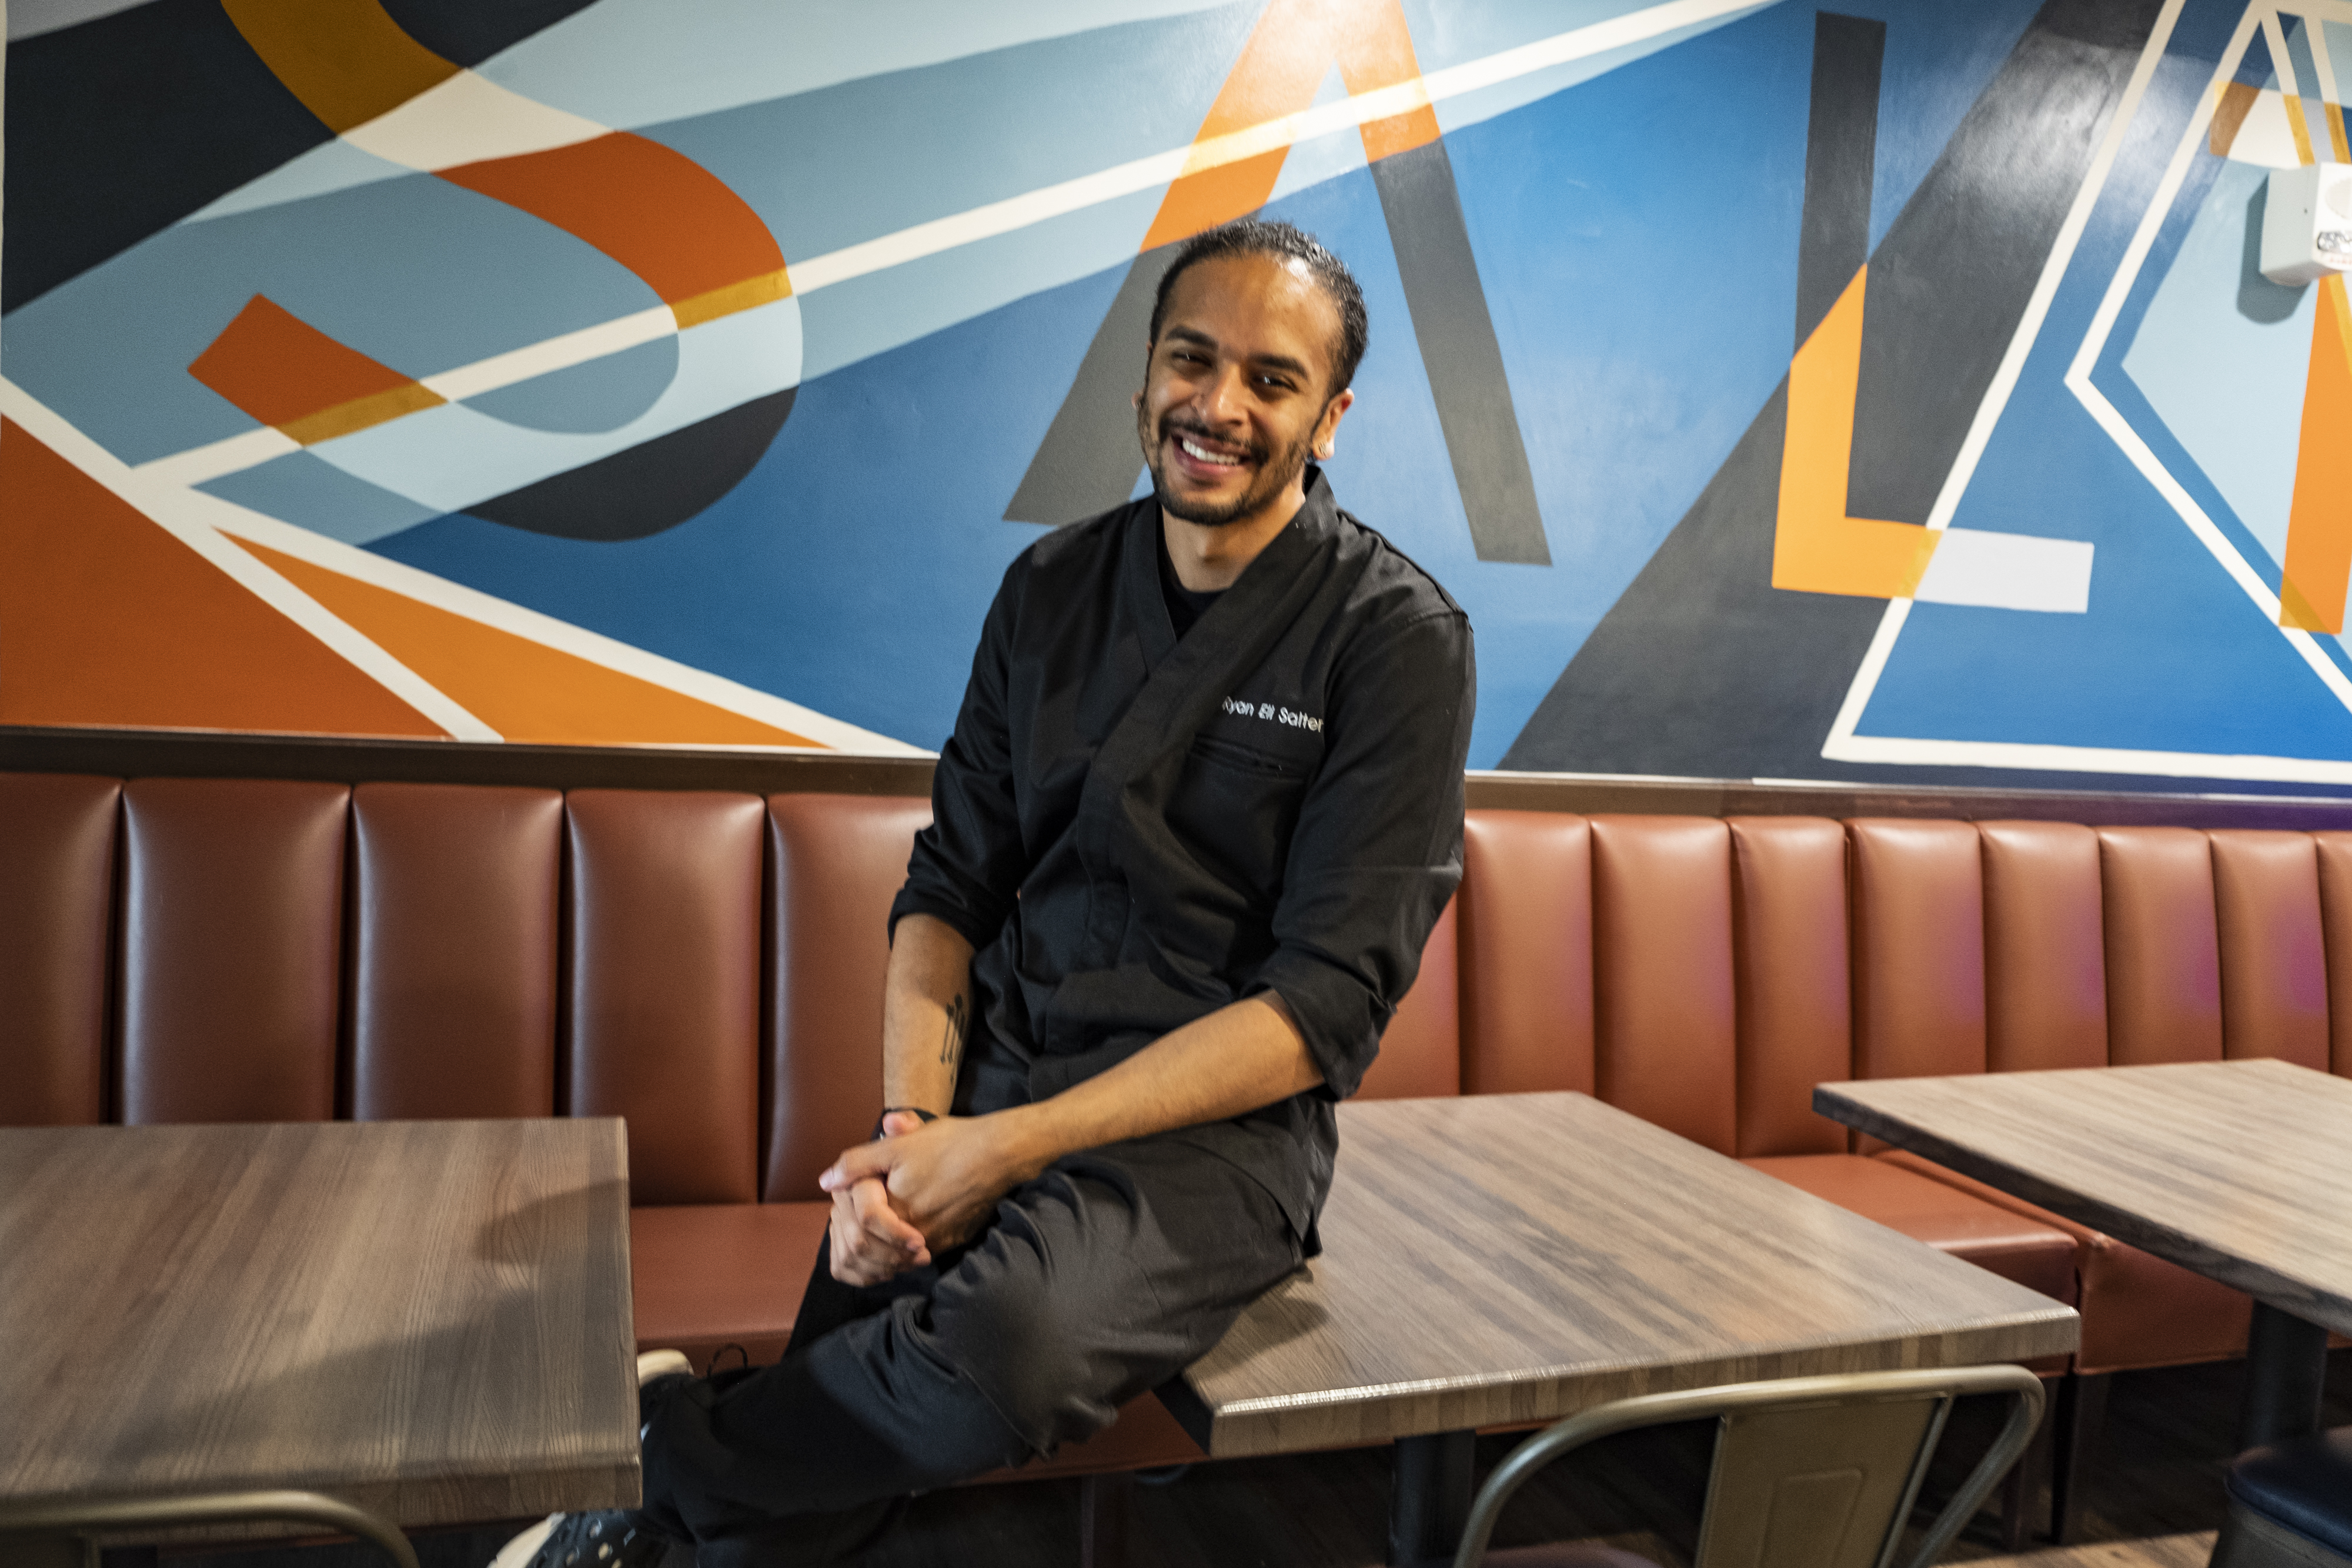 A man with dark hair pulled back, wearing a black chef jacket and black pants leaning on a table in front of a mural at Salt &amp; Ko. in Southfield, Michigan.